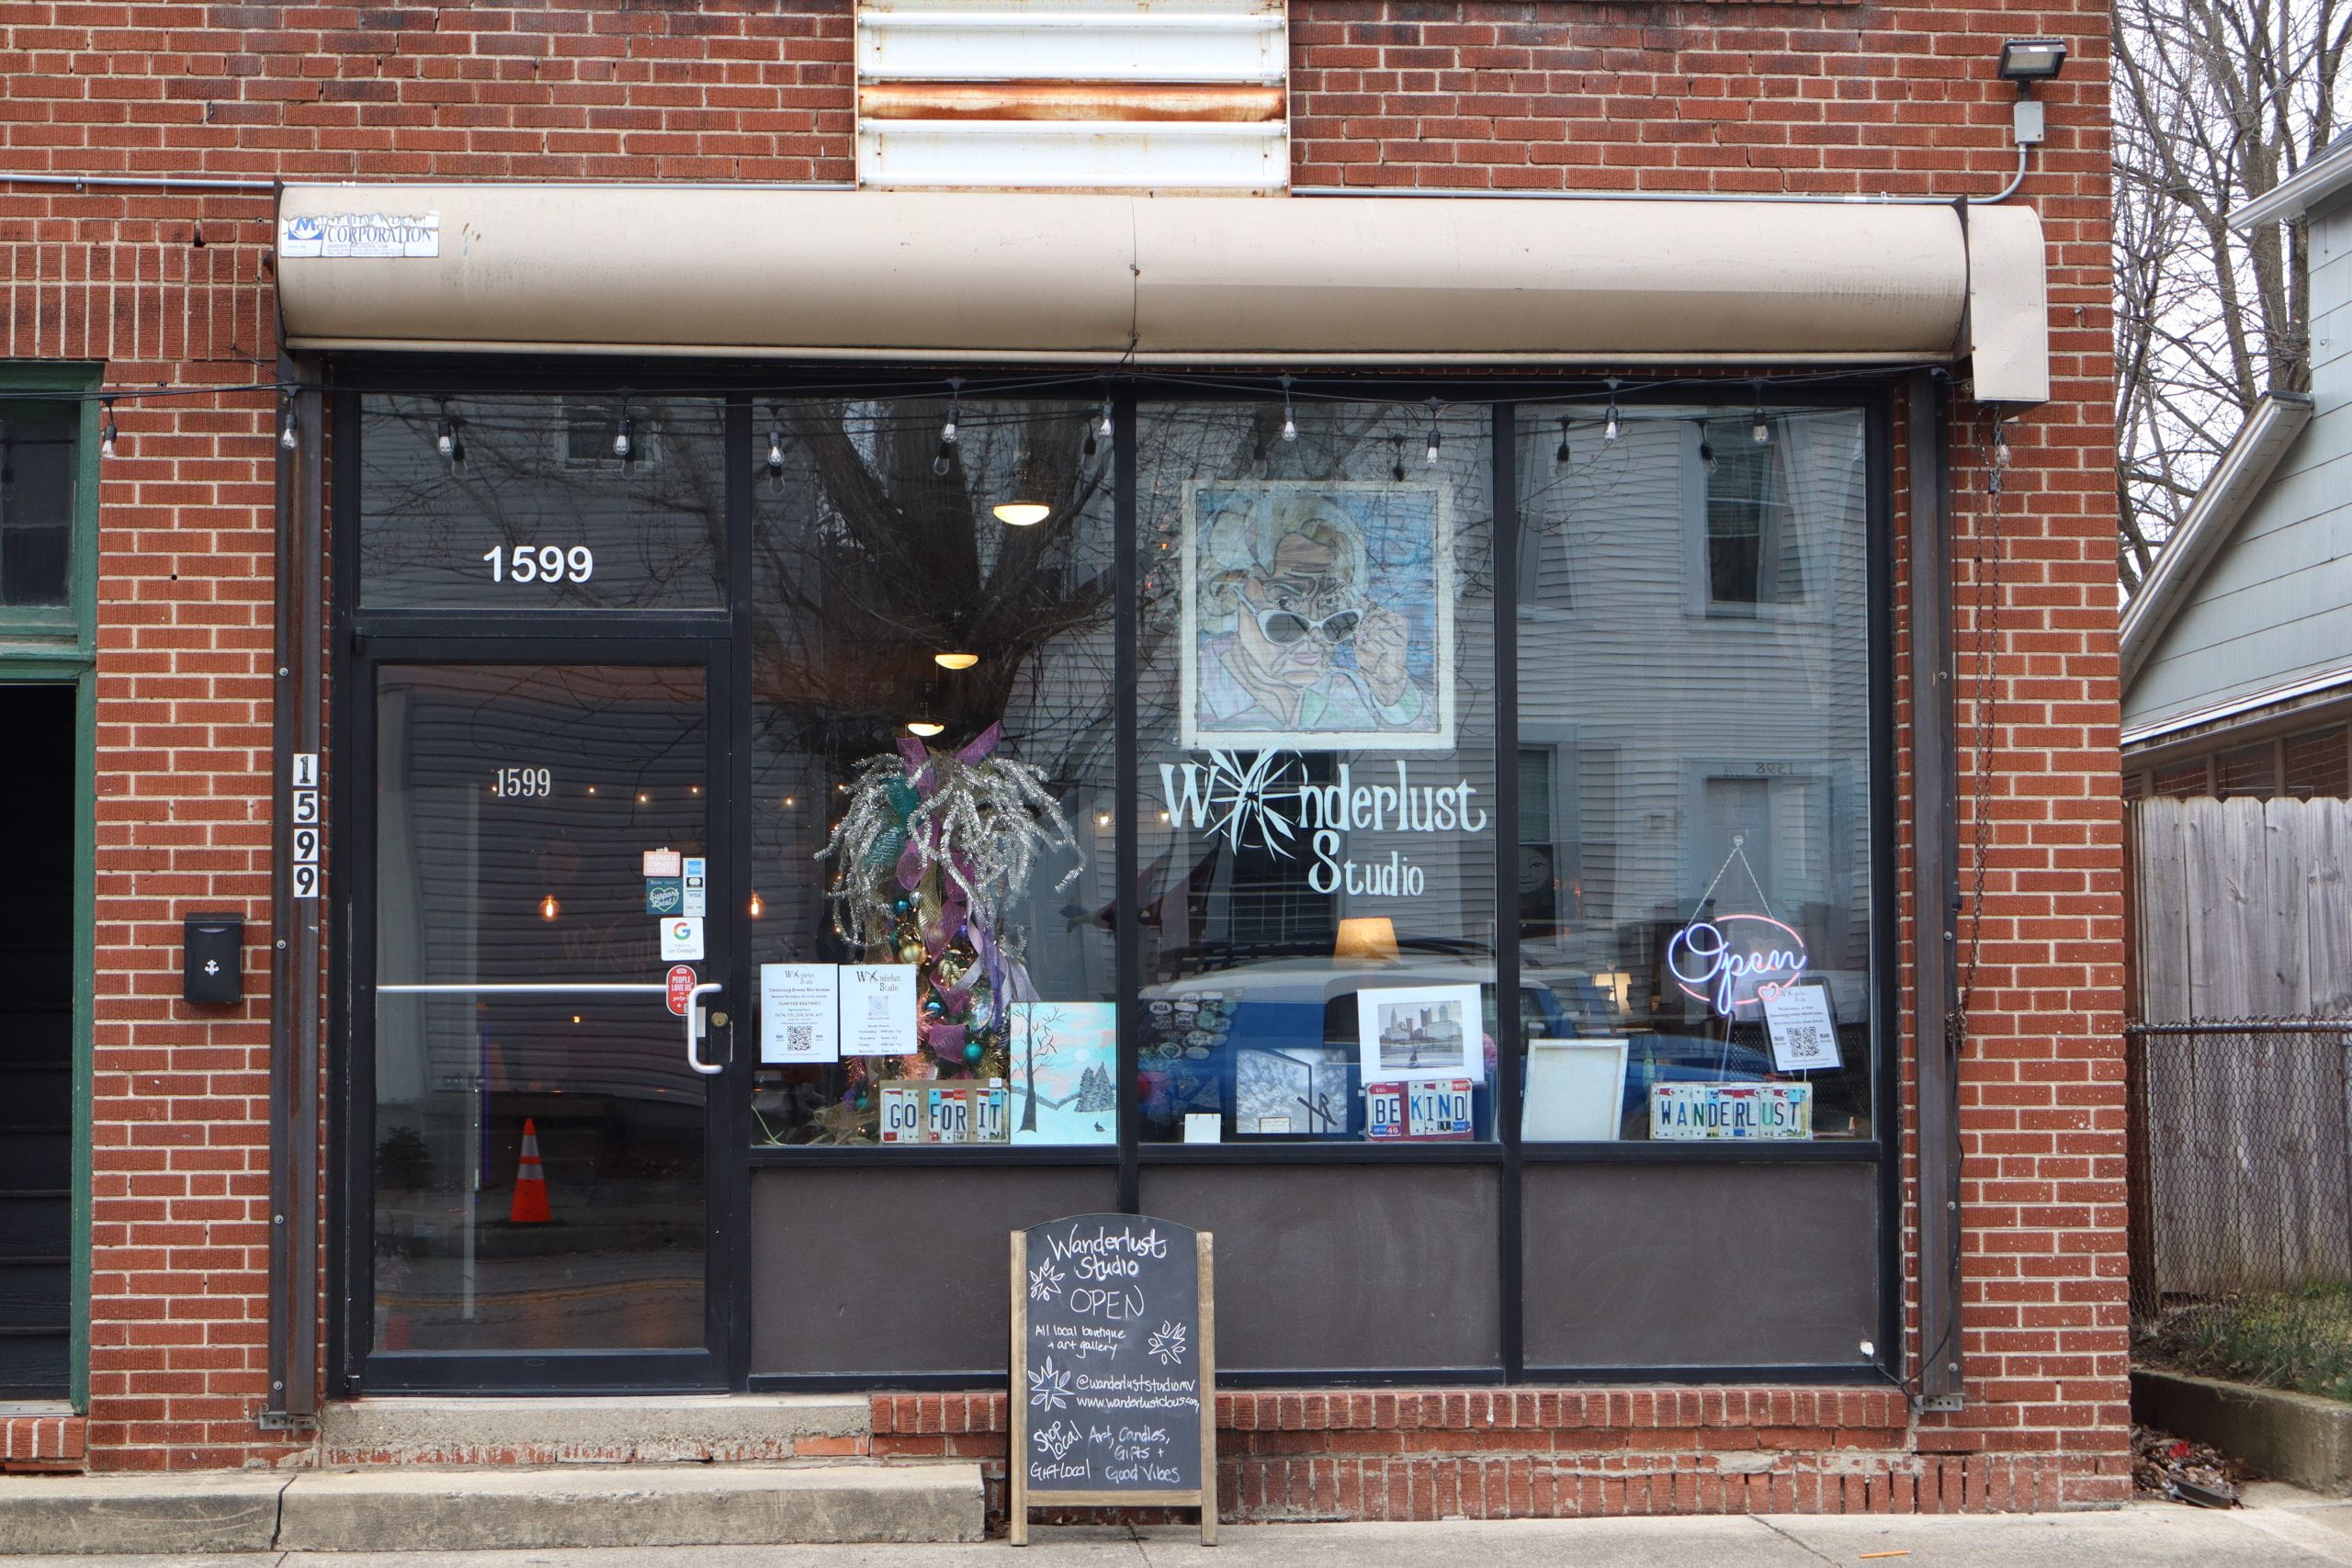 The exterior of Columbus-based boutique Wanderlust Studio, located at 1599-1603 S. Fourth St. Credit: Cora Hernandez